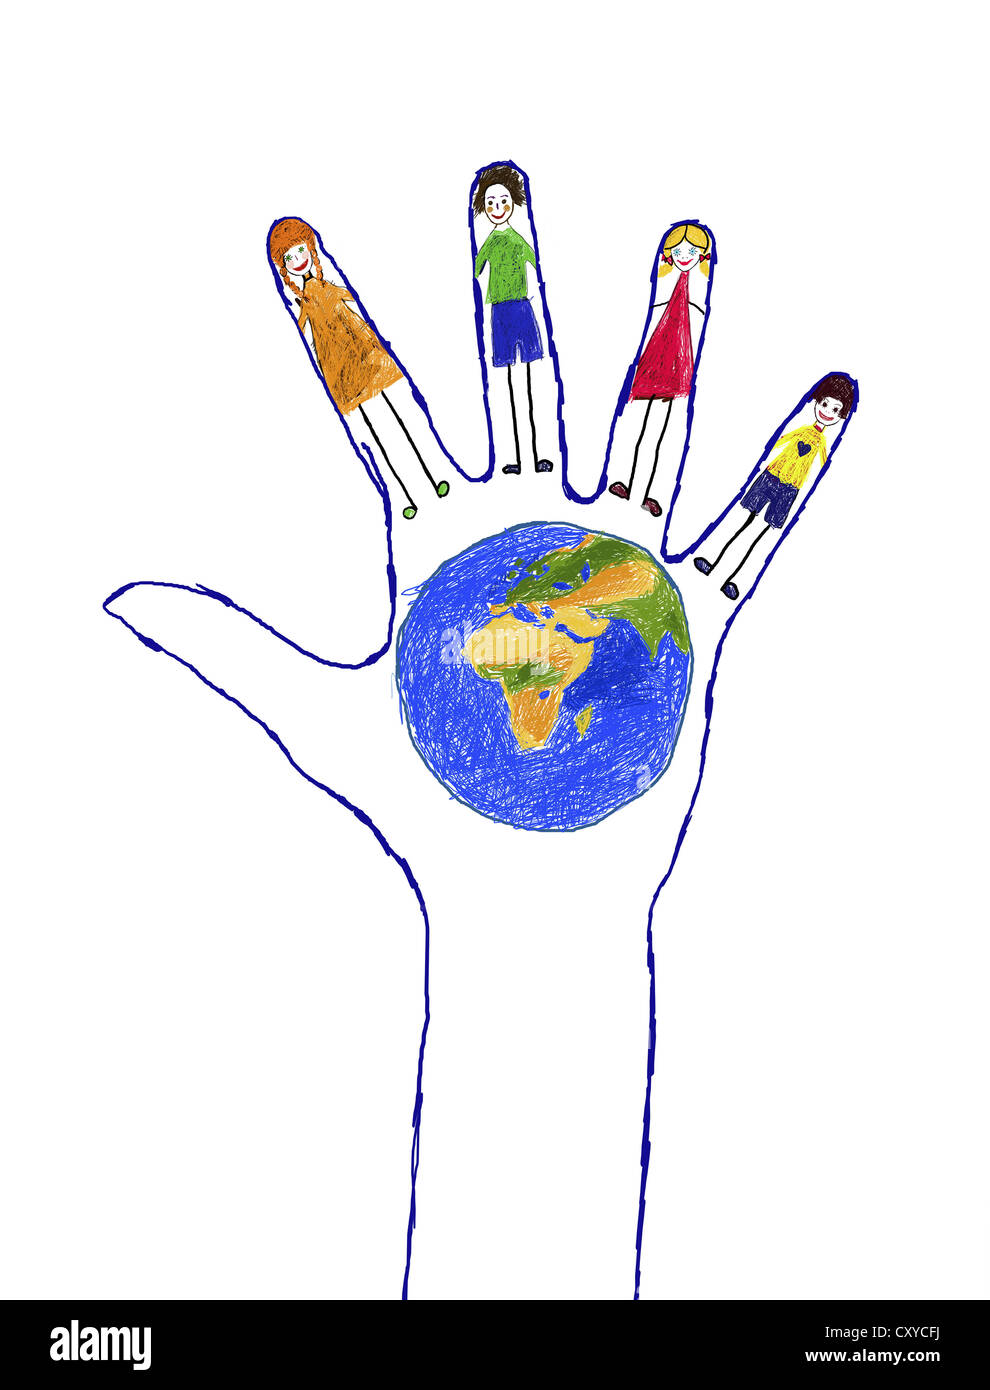 Children and a globe painted on a hand, drawing Stock Photo